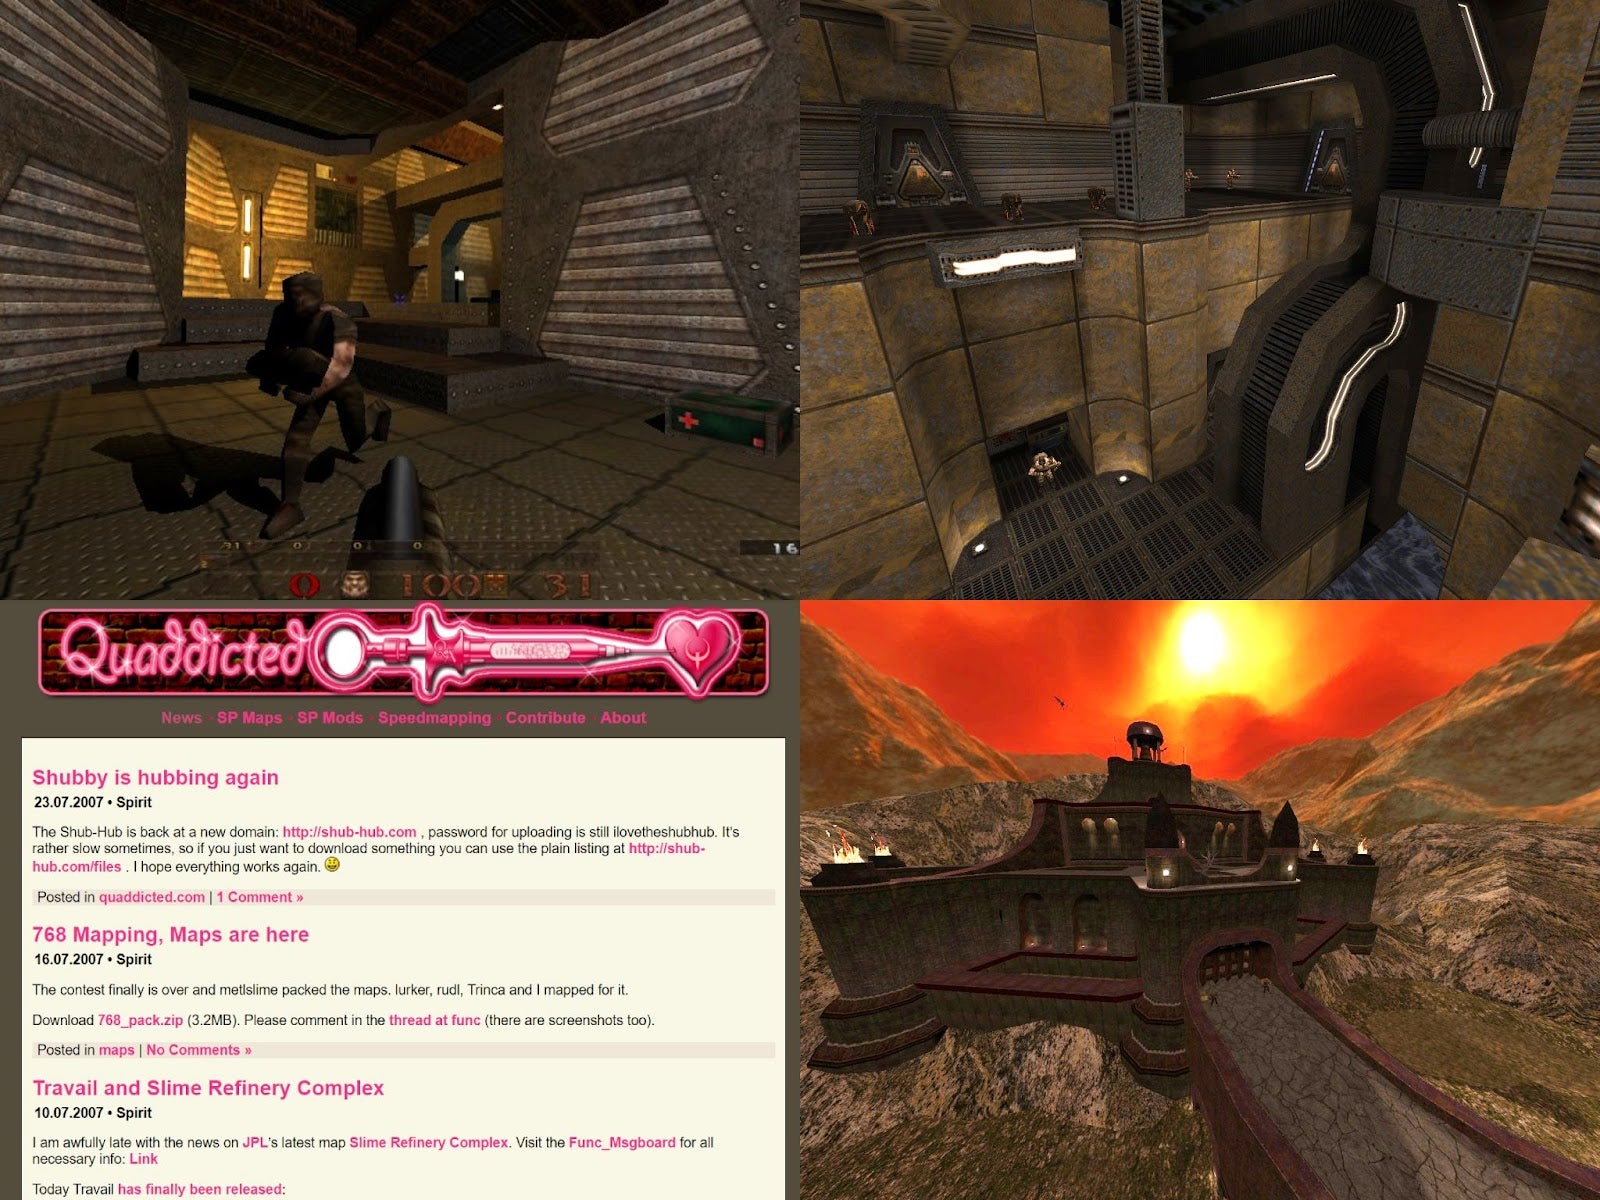 A grid image of Quake mods: DarkPlaces in 2004 with QE1 textures (Quake Revitalization Project), Insomnia, Marcher Fortress, Quaddicted front page in 2007